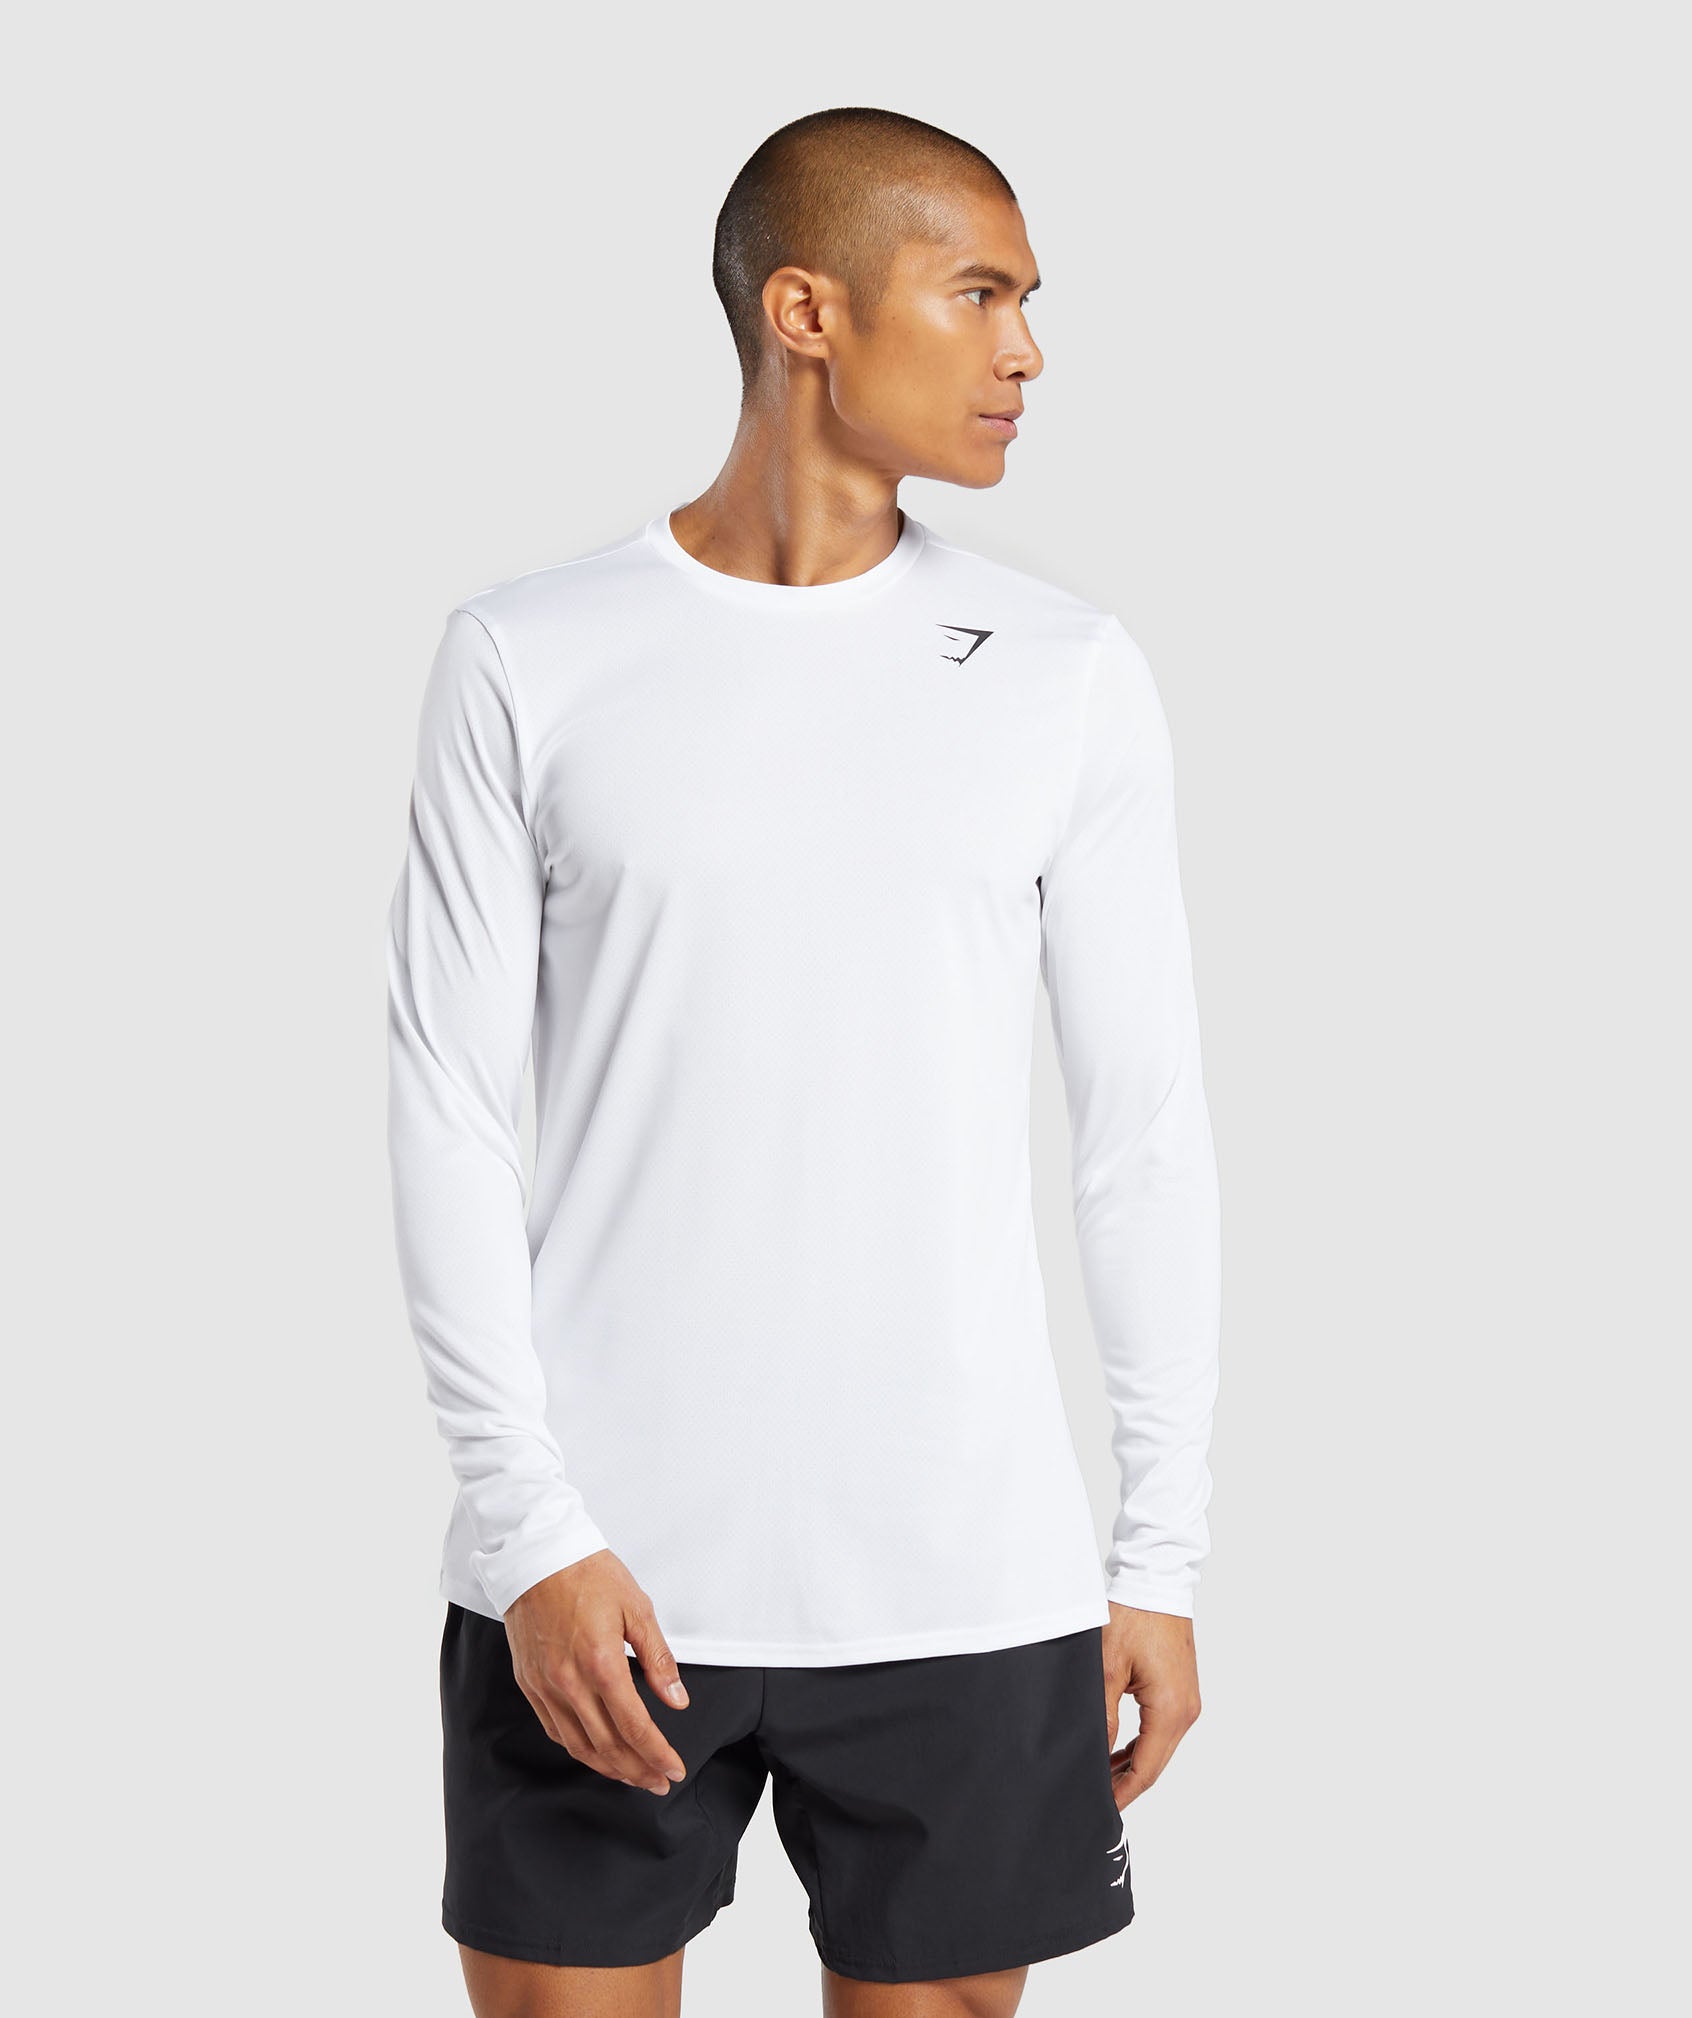 Arrival Long Sleeve T-Shirt in White ist nicht auf Lager